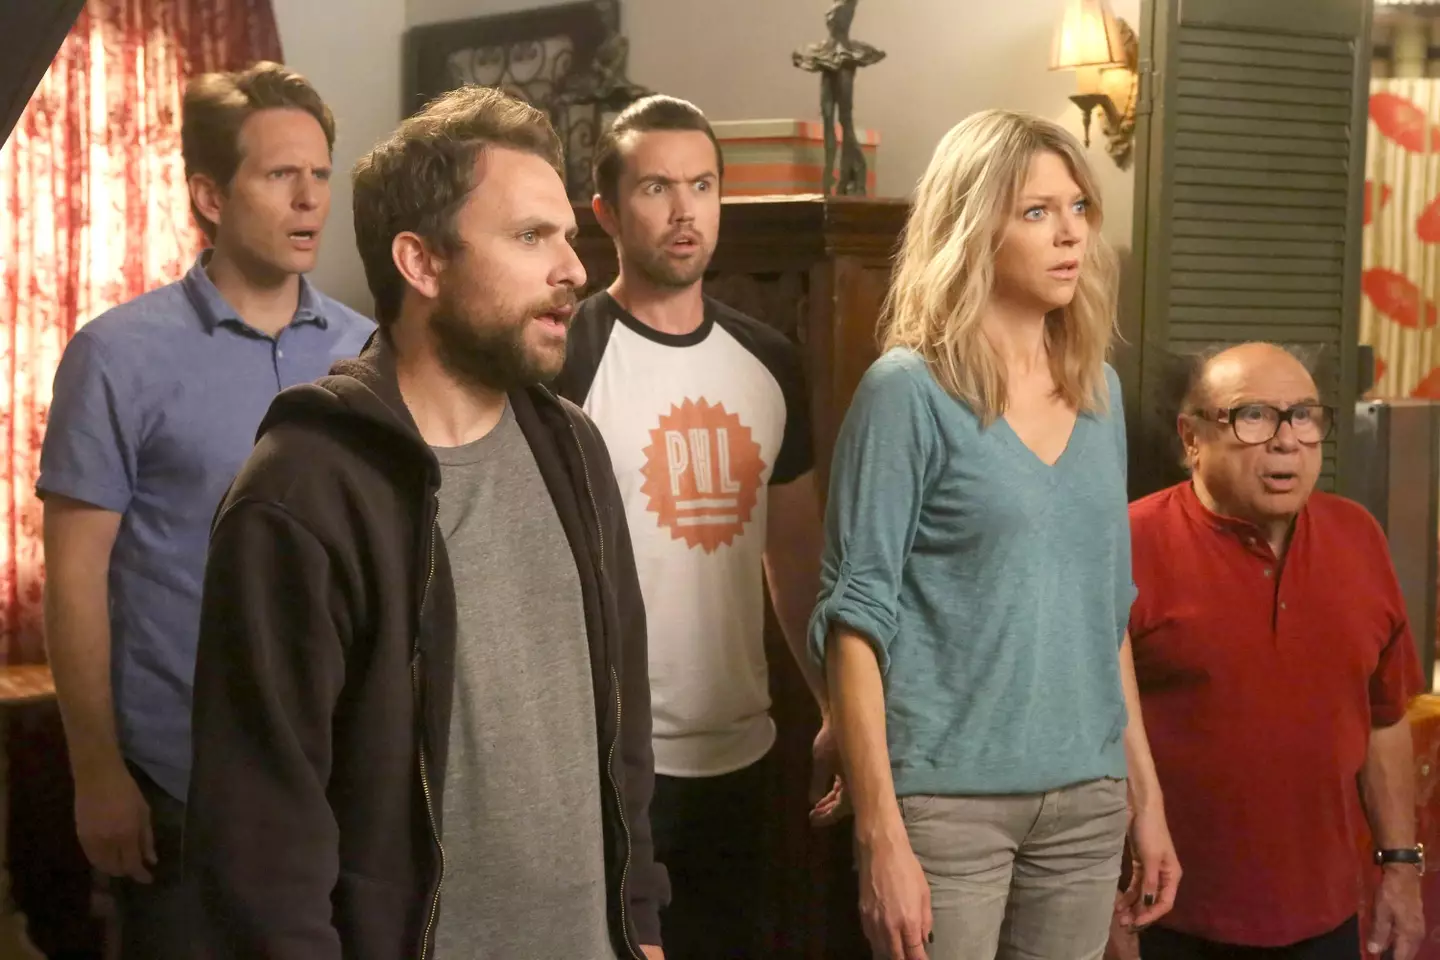 Always Sunny has become one of the longest running series in history.